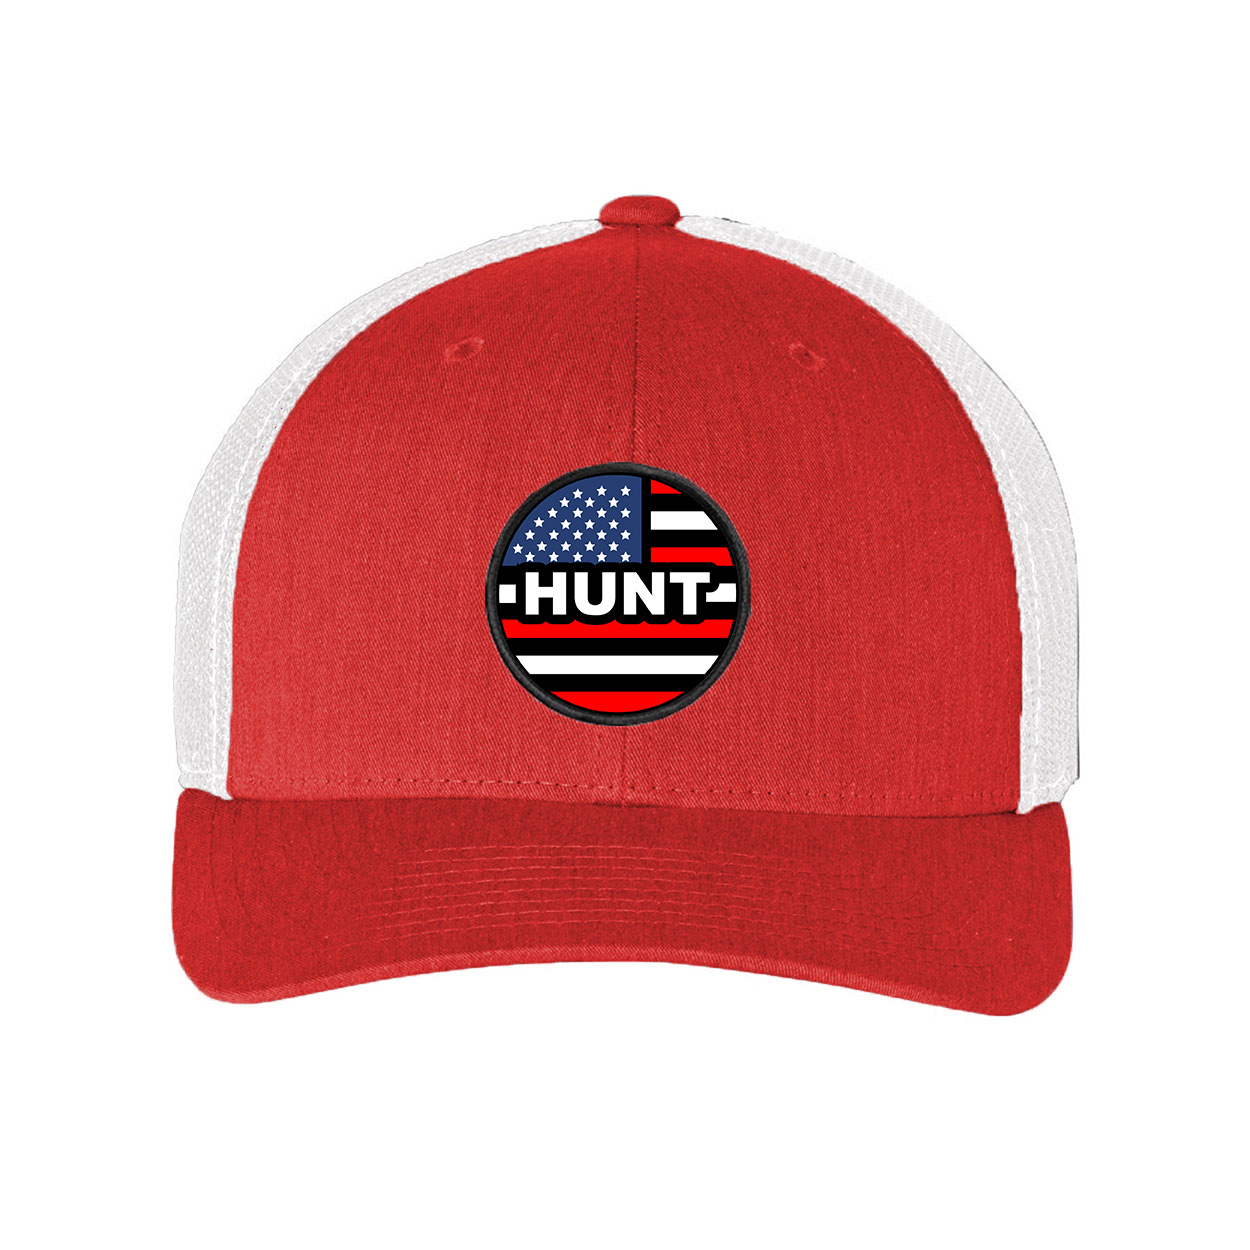 Hunt Brand Logo Classic Circle Woven Patch USA Snapback Trucker Hat Heather Red/White